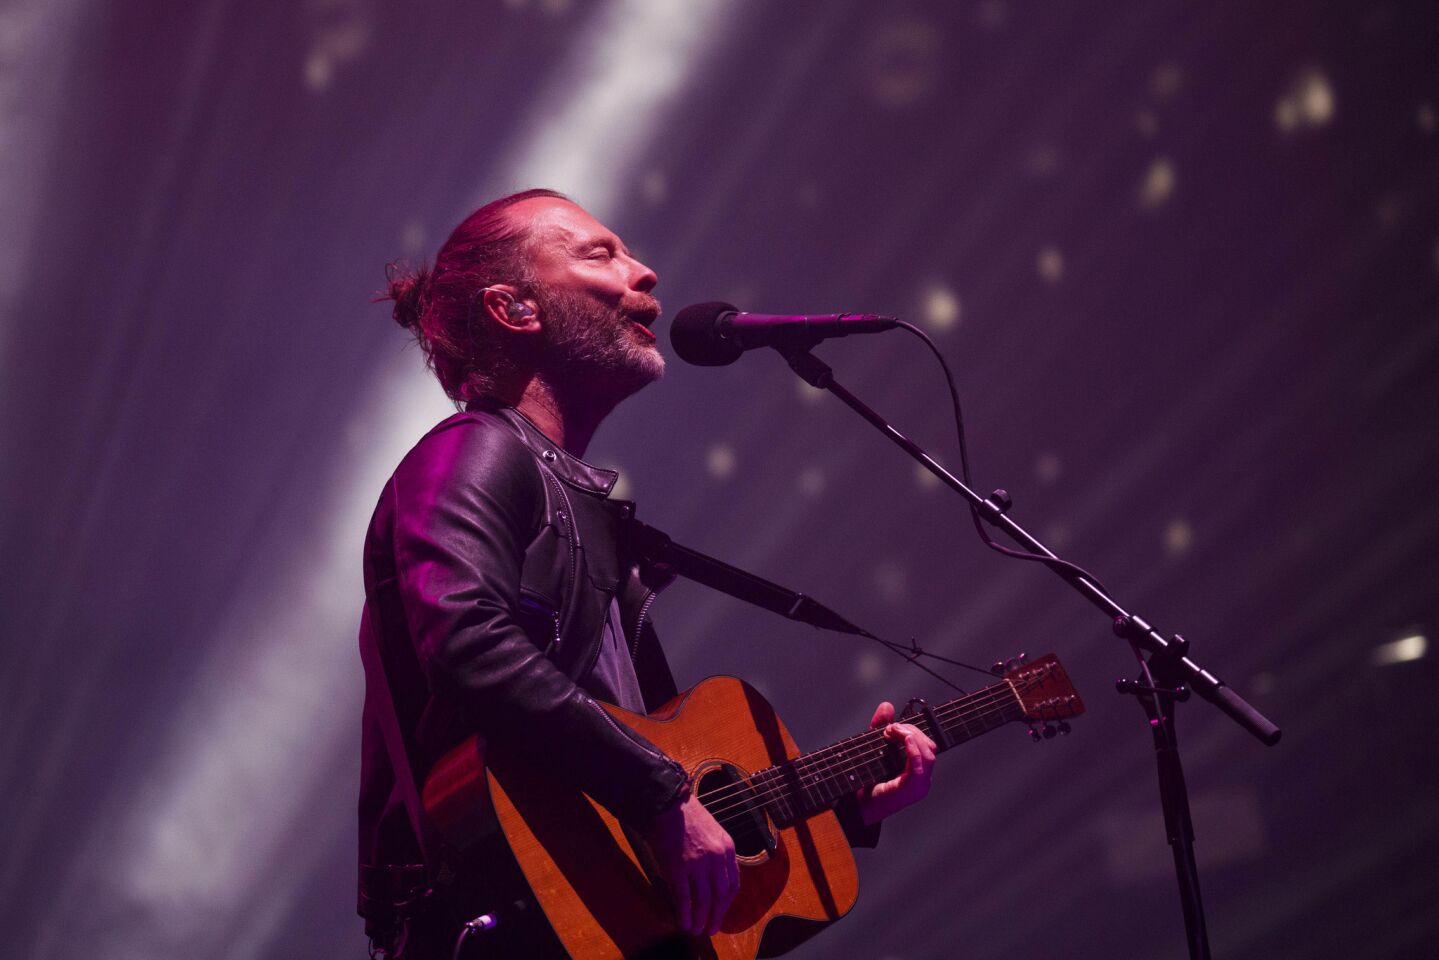 Singer Thom Yorke of Radiohead performs during weekend one of the three-day Coachella Valley Music and Arts Festival at the Empire Polo Grounds on Friday, April 14, 2017 in Indio, Calif. (Patrick T. Fallon/ For The Los Angeles Times)